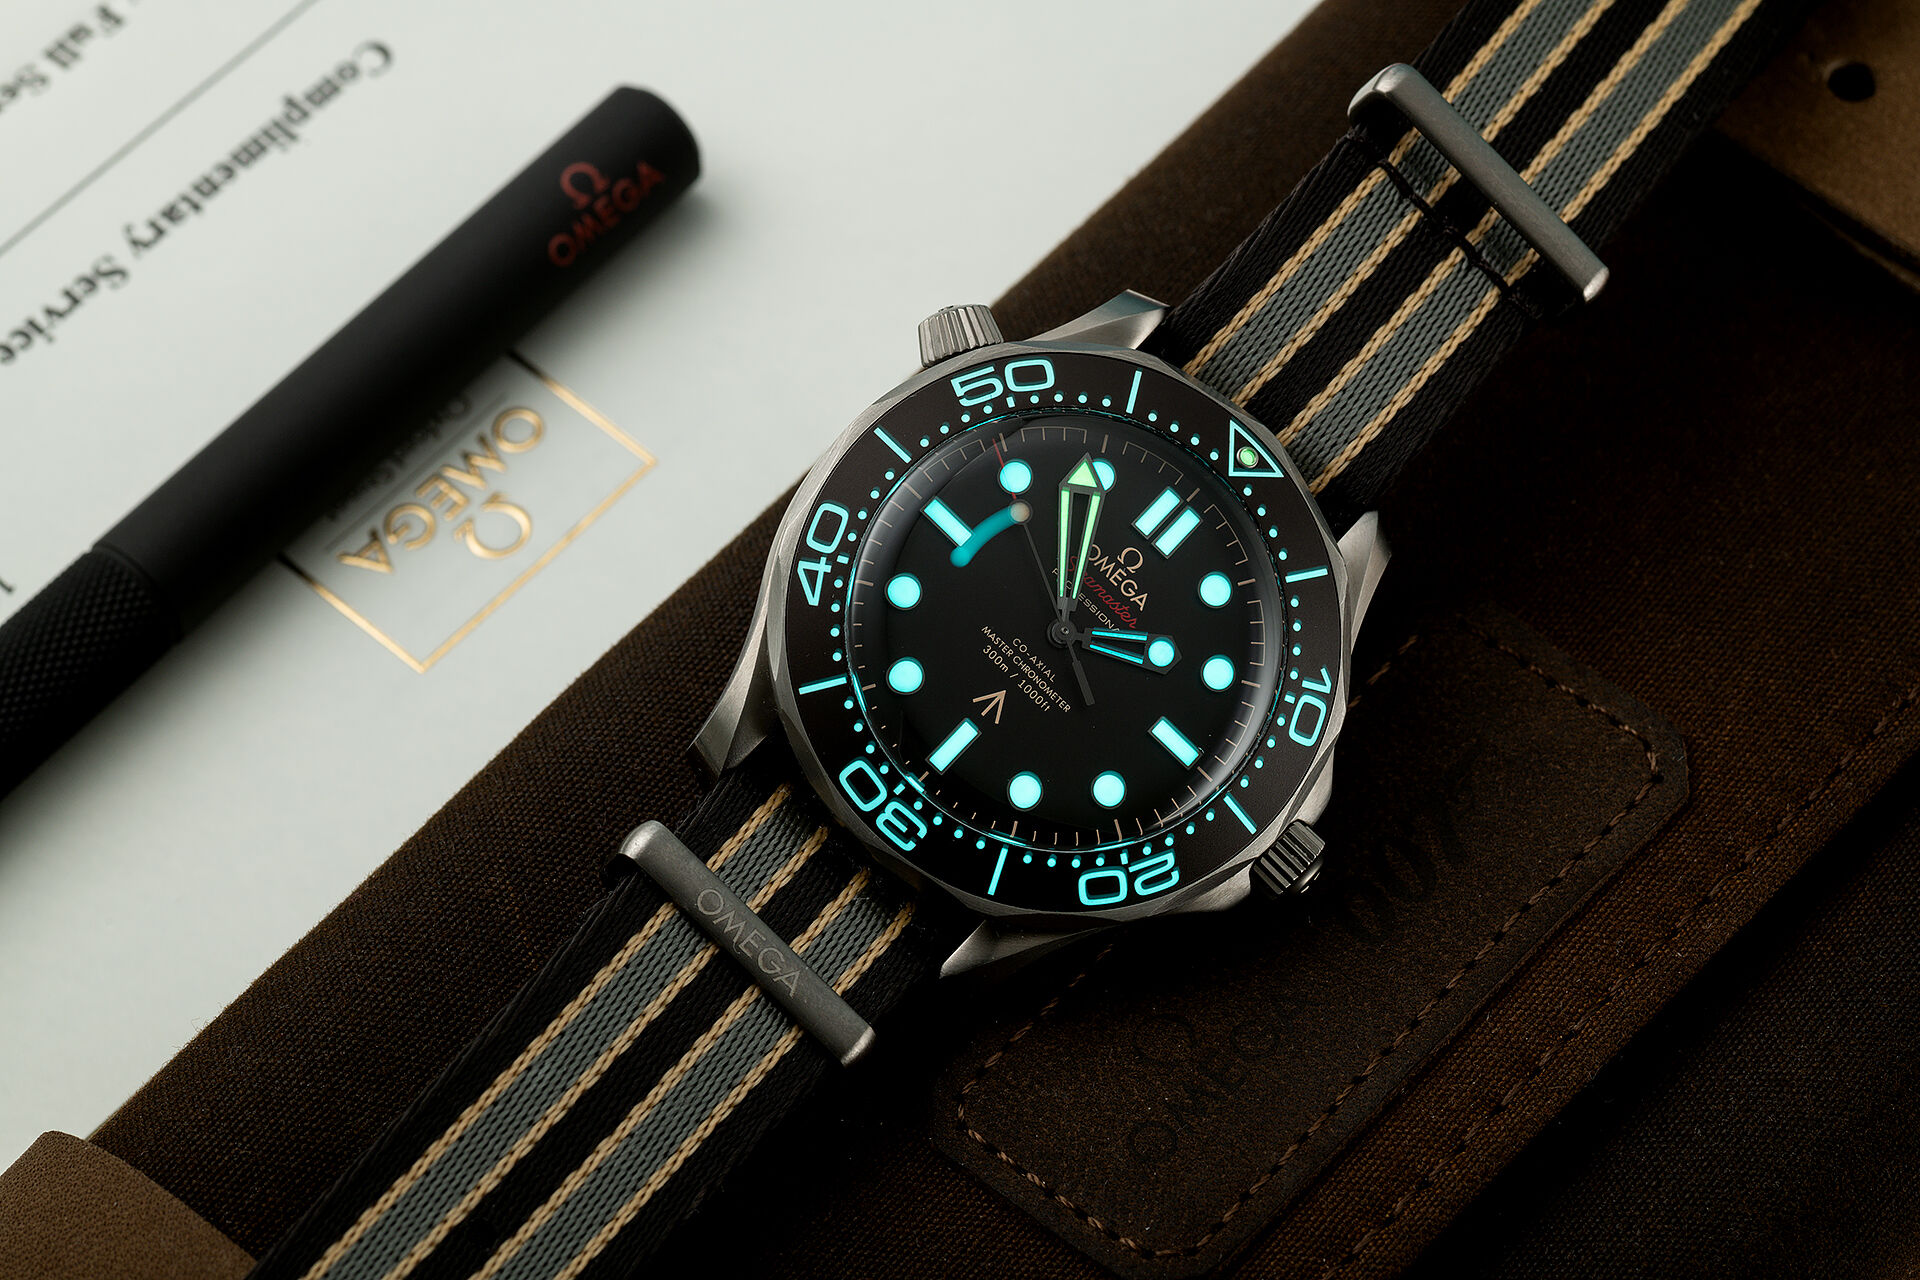 ref 210.92.42.20.01.001 | 'No Time To Die' | Omega Seamaster Diver 300